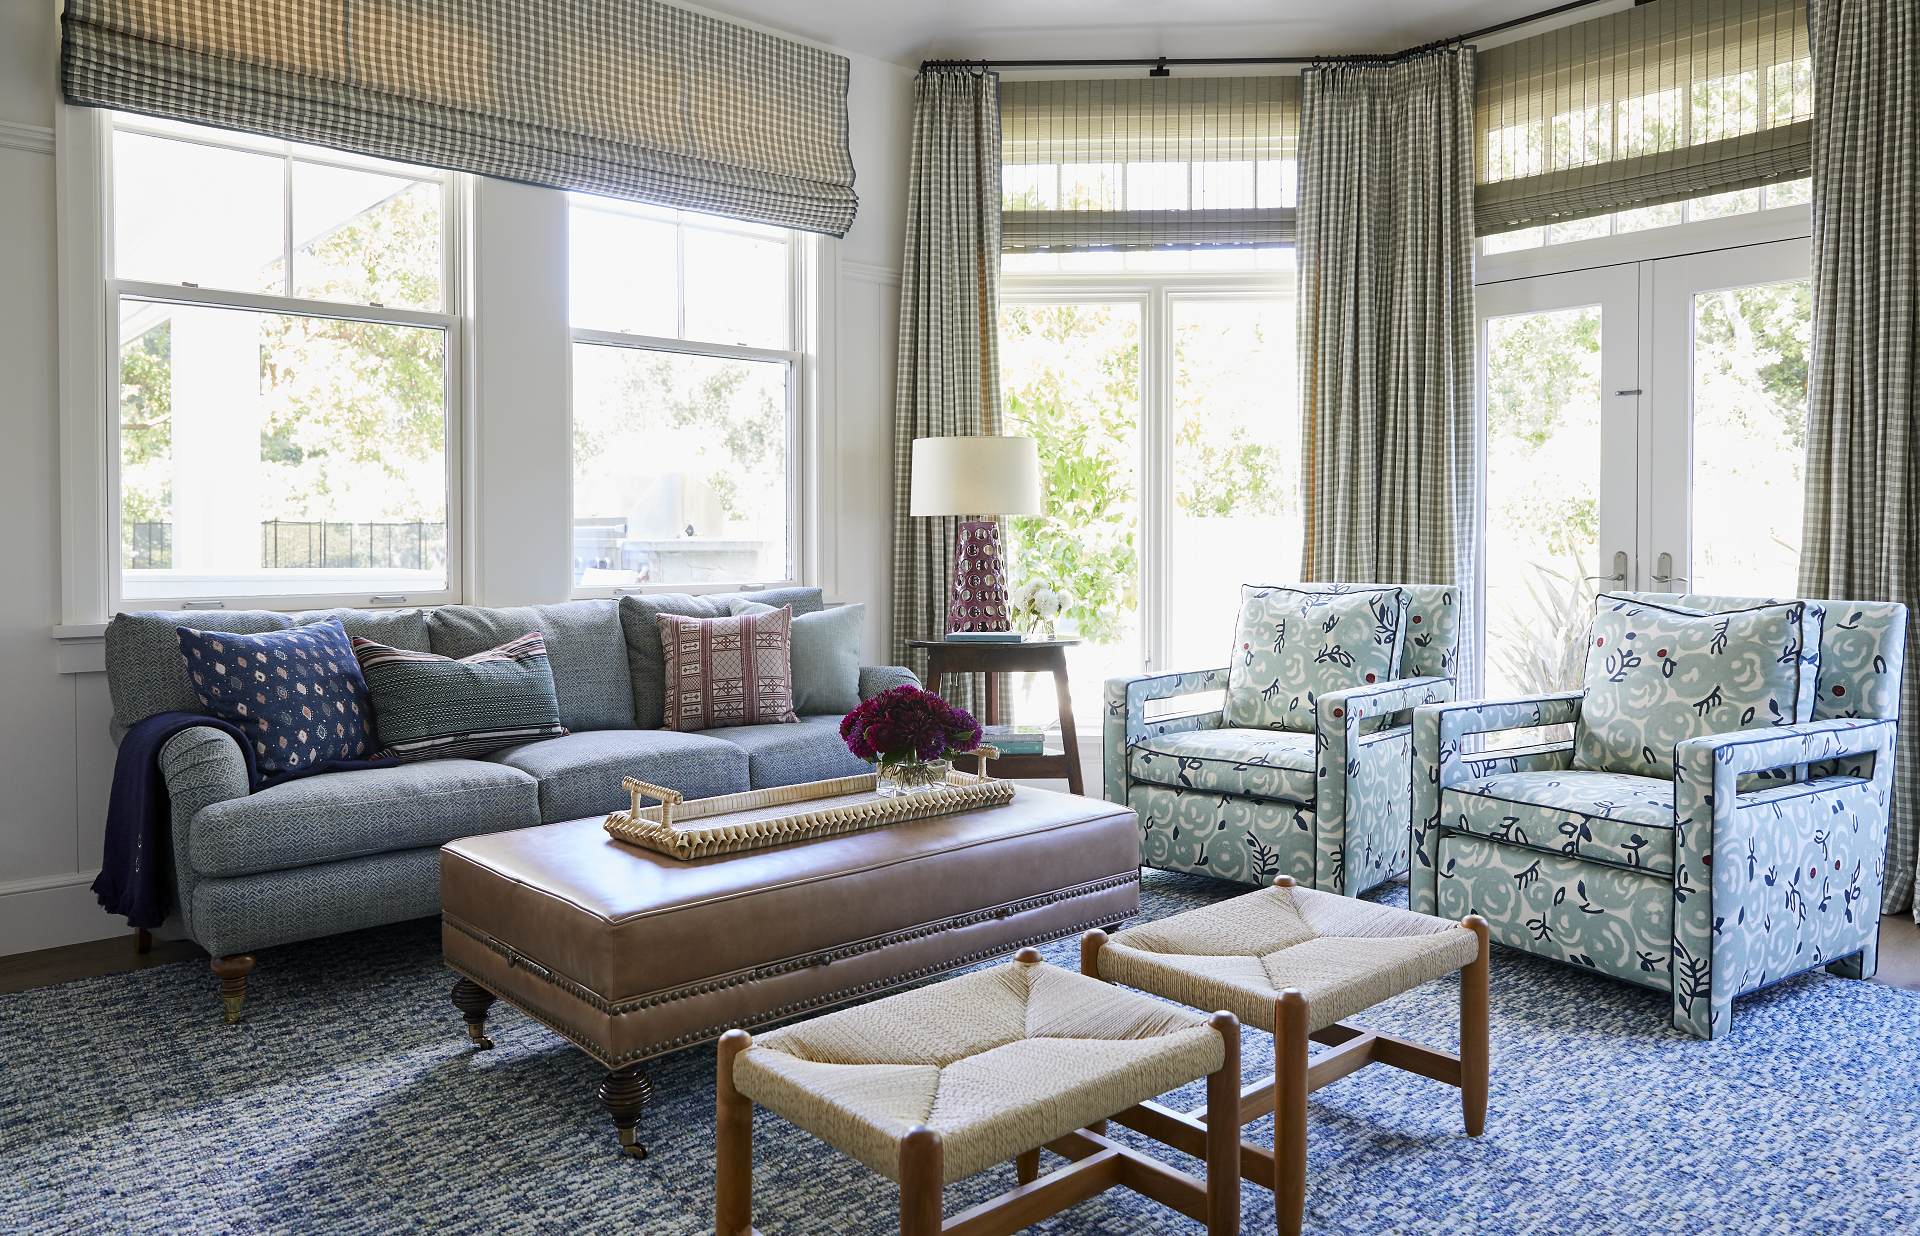 Checkered roman shades and pleated drapes with woven shades and upholstered seating